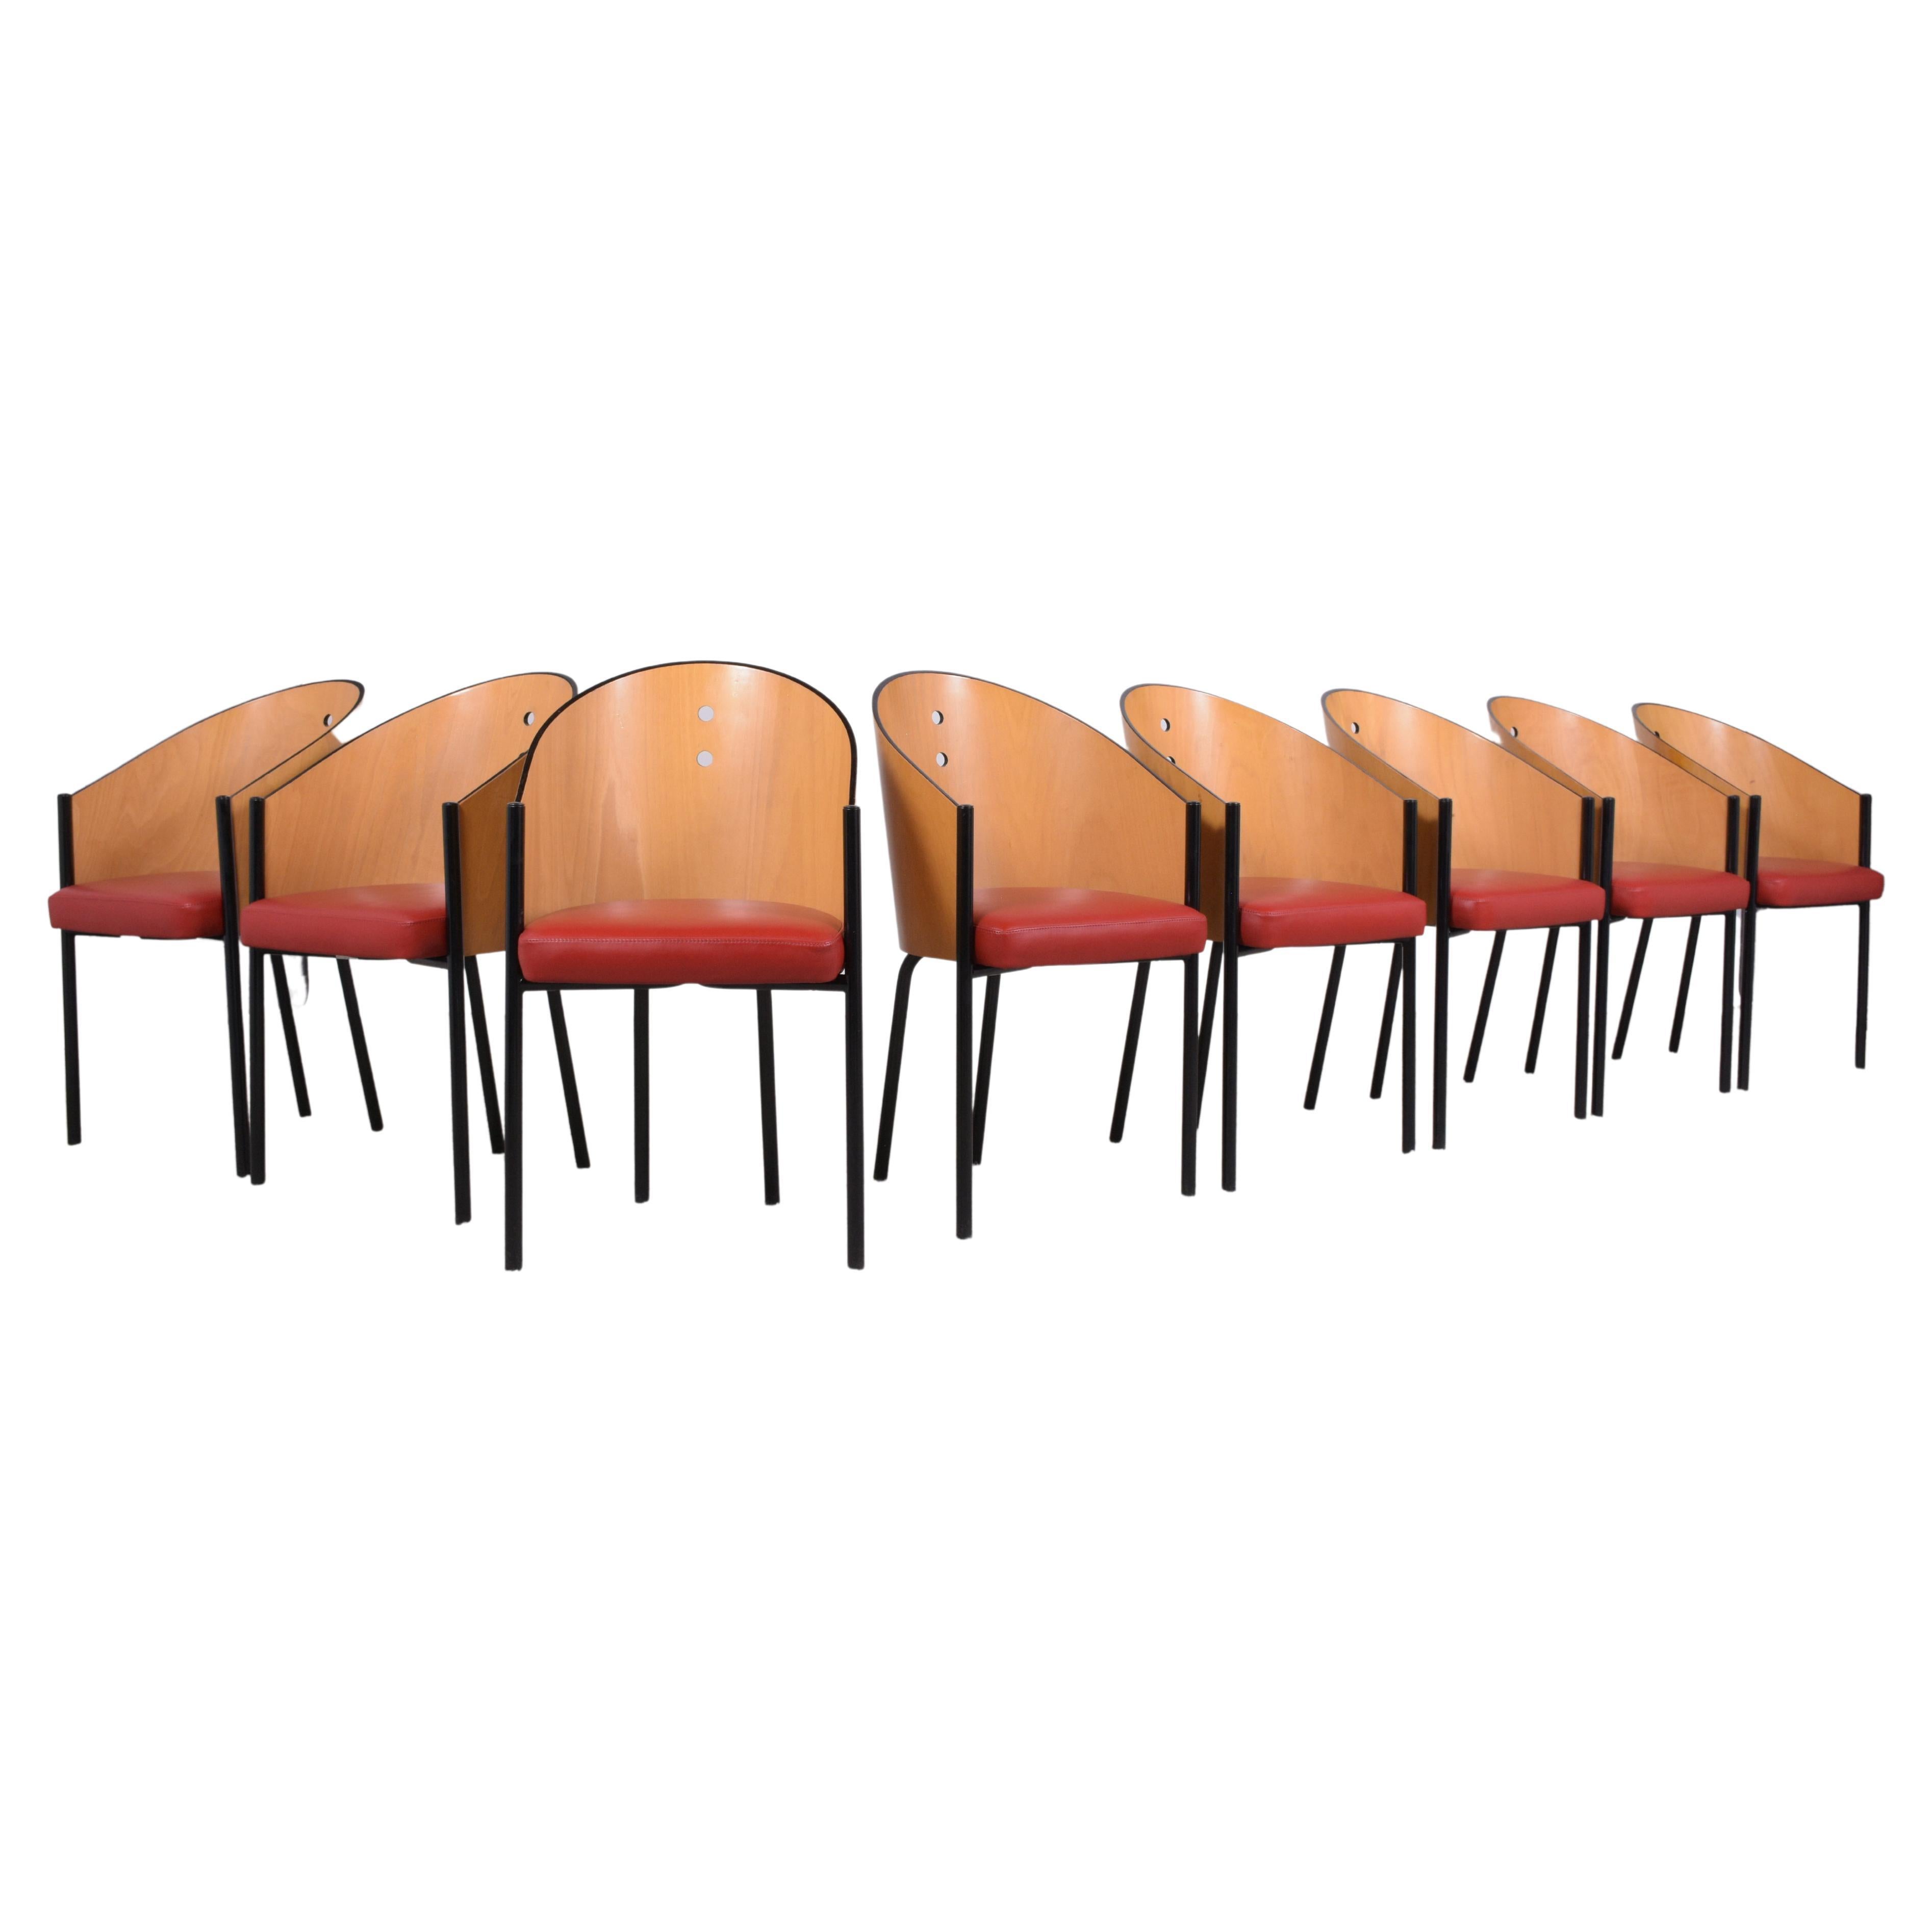 Presenting a standout set of eight vintage mid-century dining chairs, meticulously handcrafted from wood and restored to pristine condition by our expert craftsmen team. Radiating a timeless appeal, each chair flaunts a barrel back design